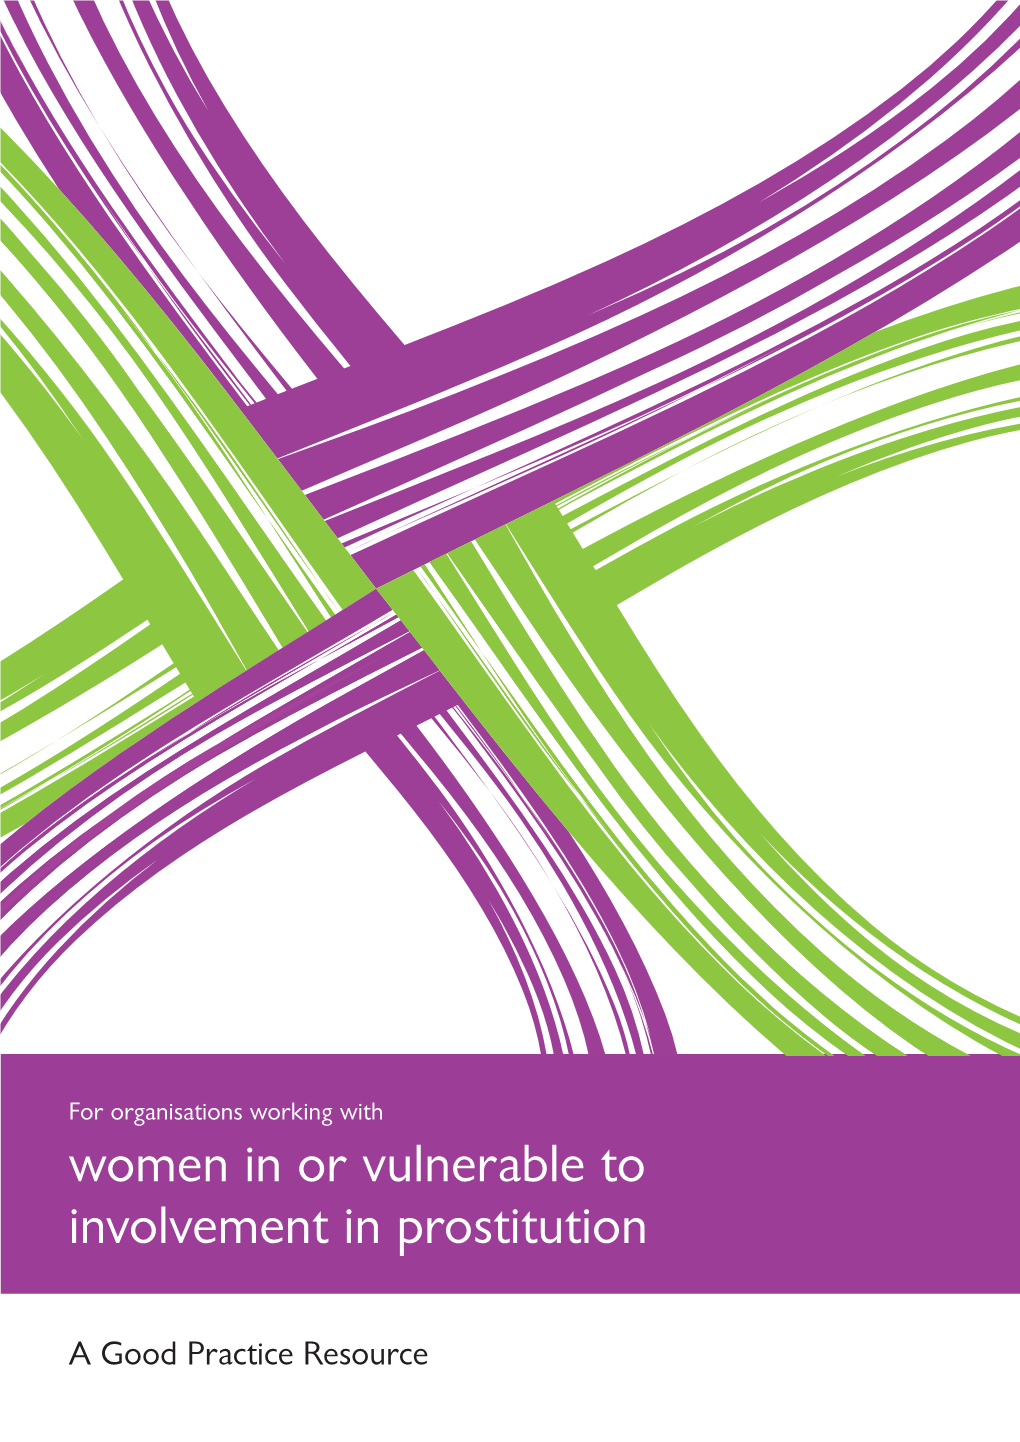 For Organisations Working with Women in Or Vulnerable to Involvement in Prostitution